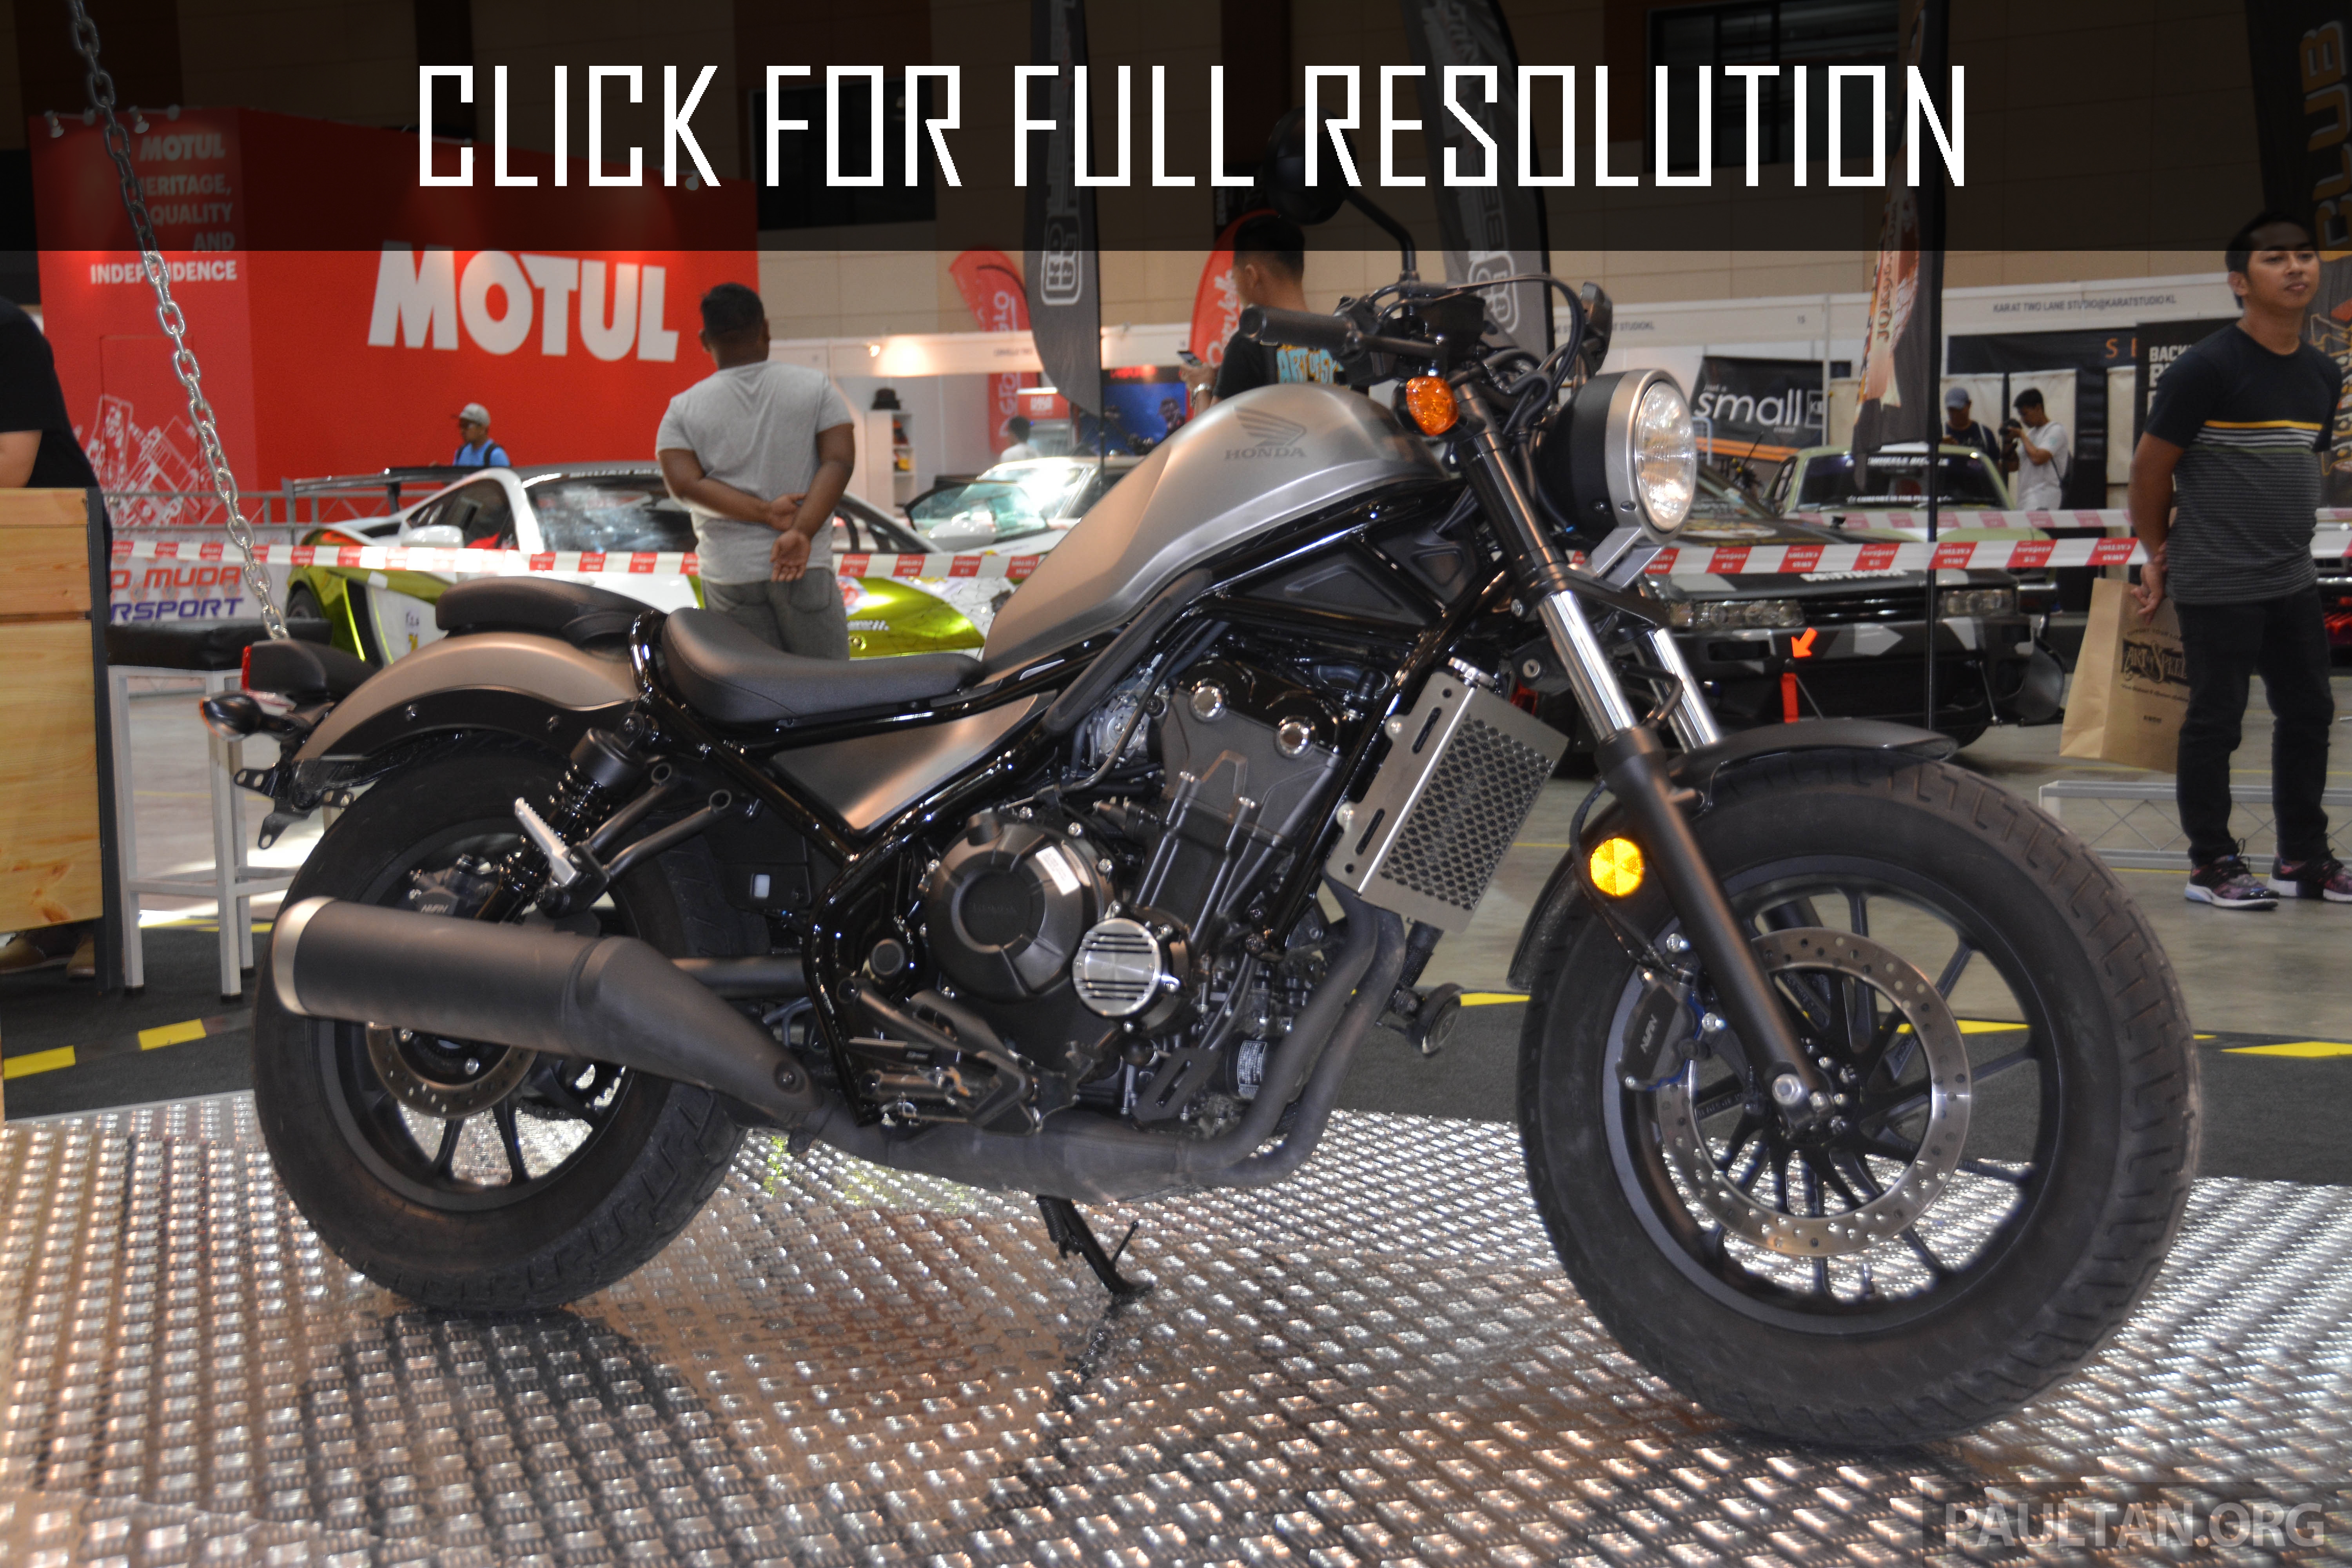 Honda Rebel 600 - amazing photo gallery, some information and ...